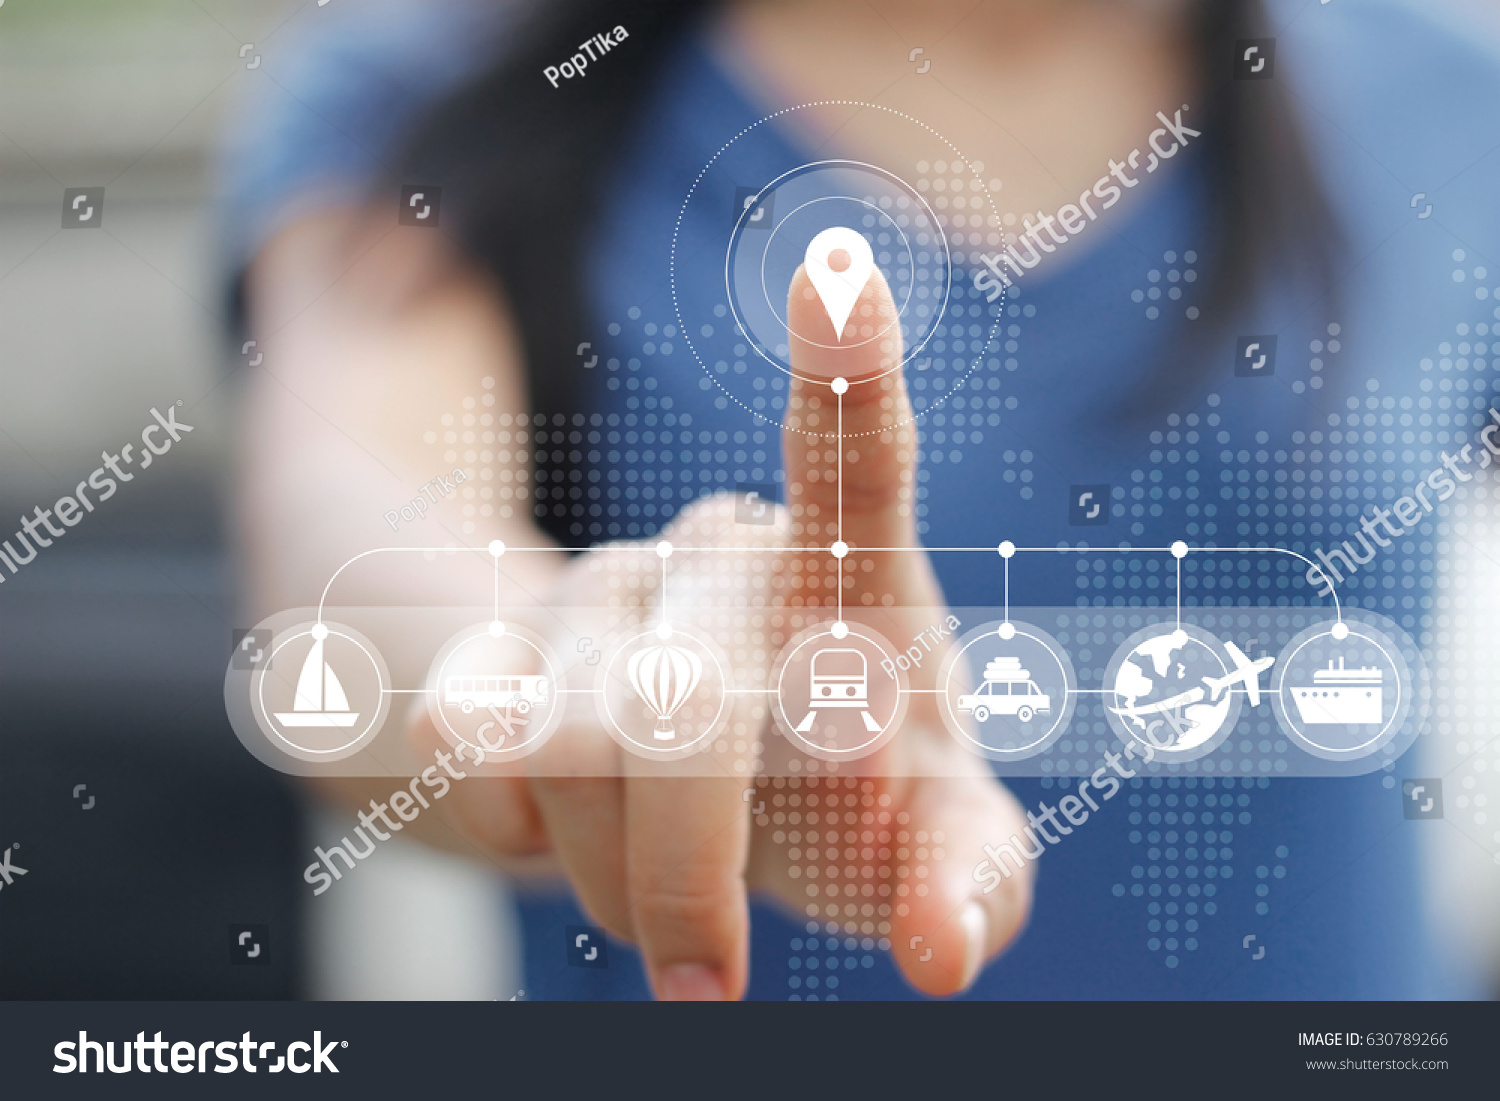 Woman touching icon travel online network connection on screen, traveler concept #630789266